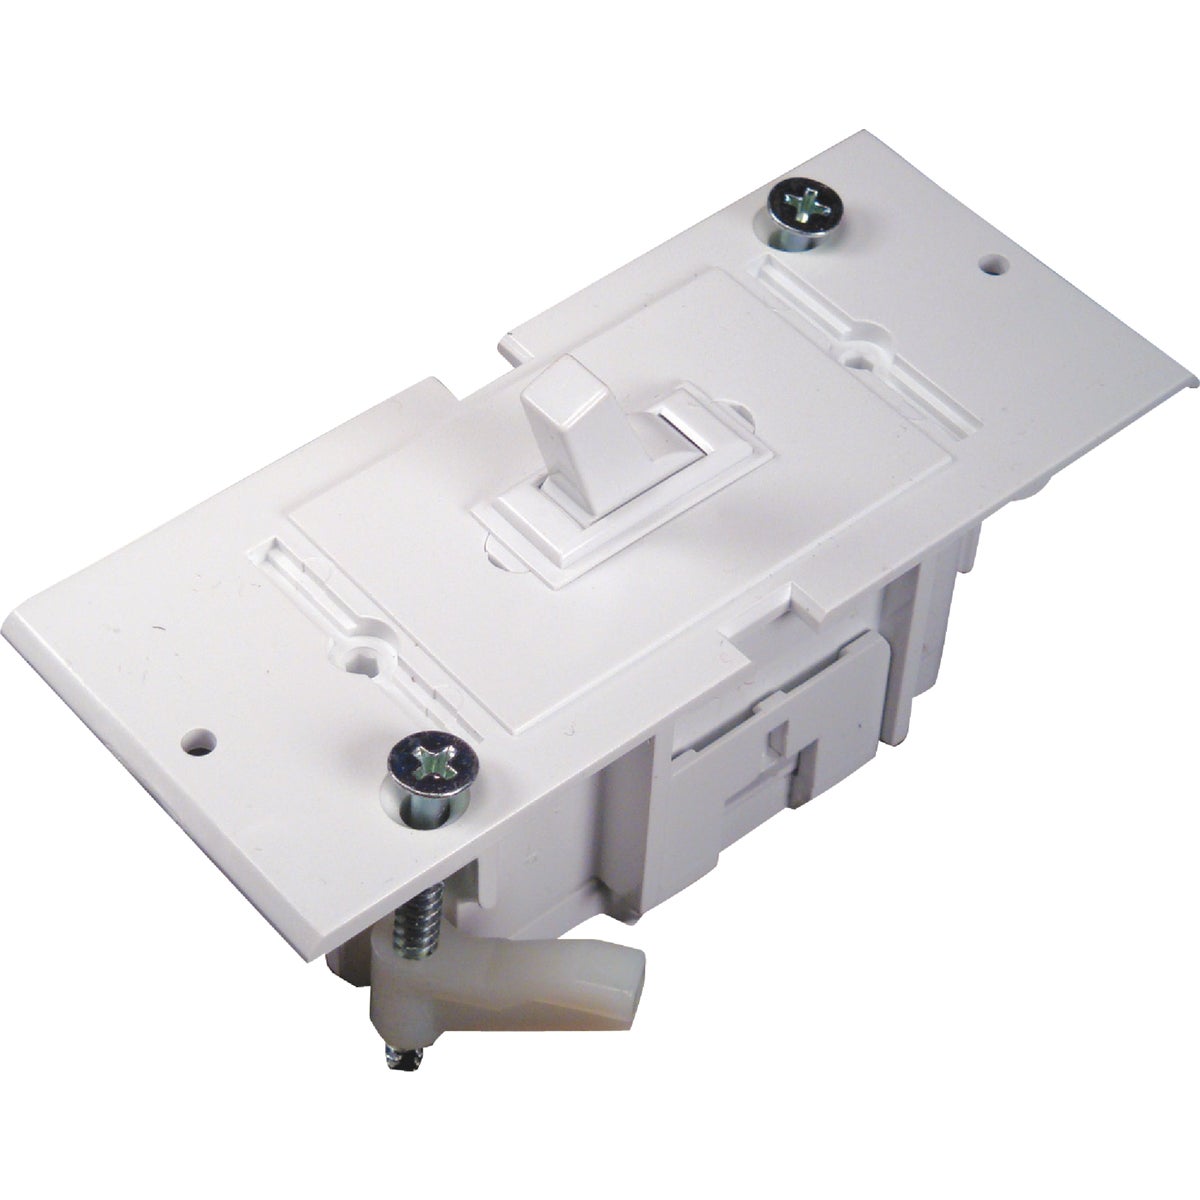 United States Hardware Conventional Electrical Switch